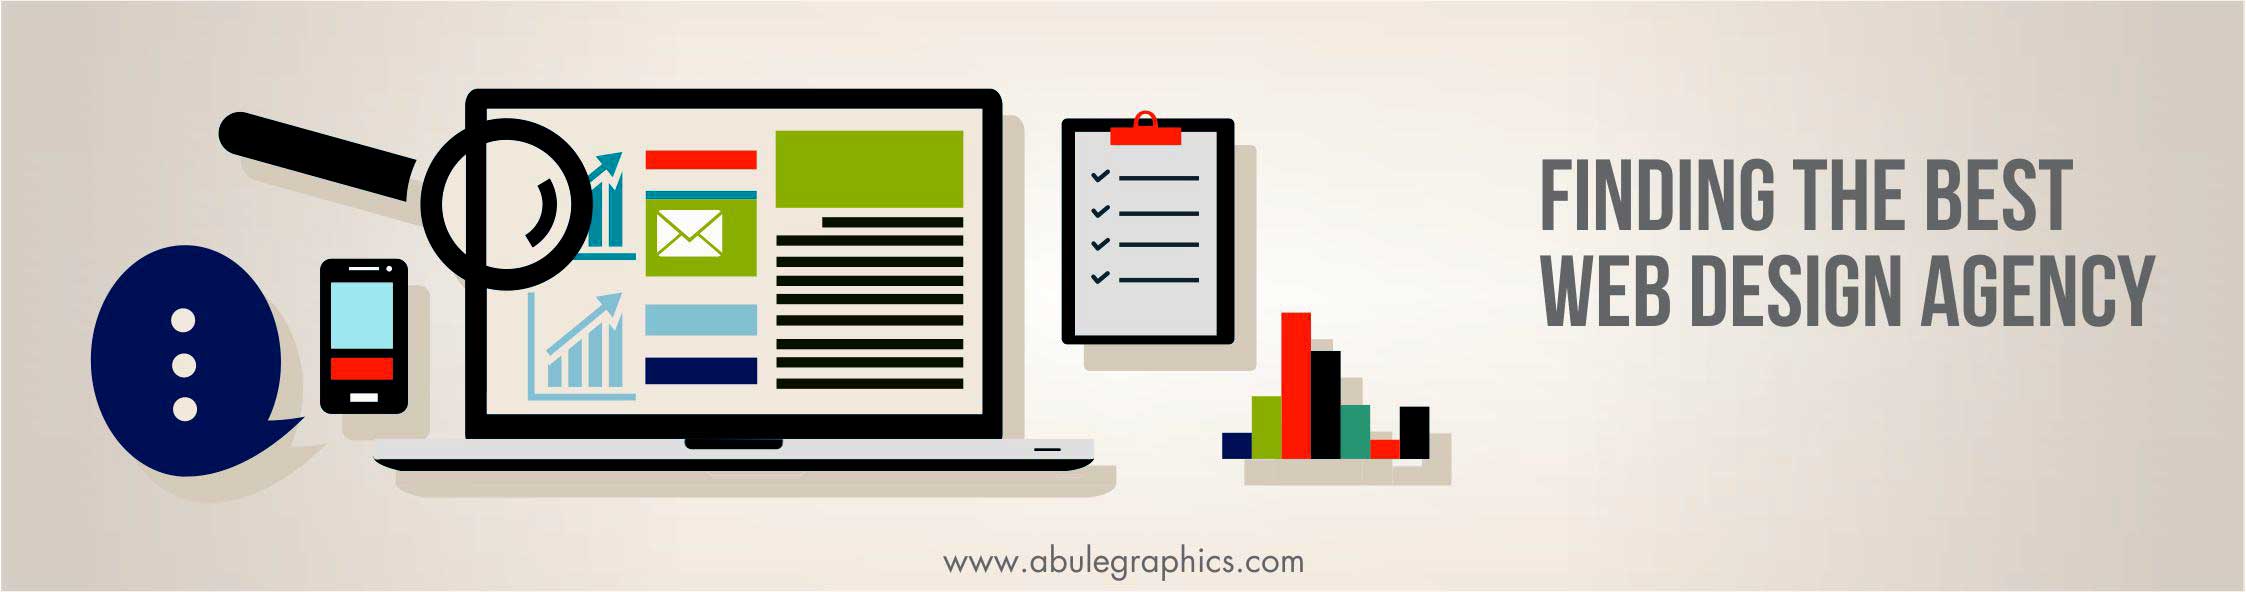 finding the best web design agency in abuja, nigeria